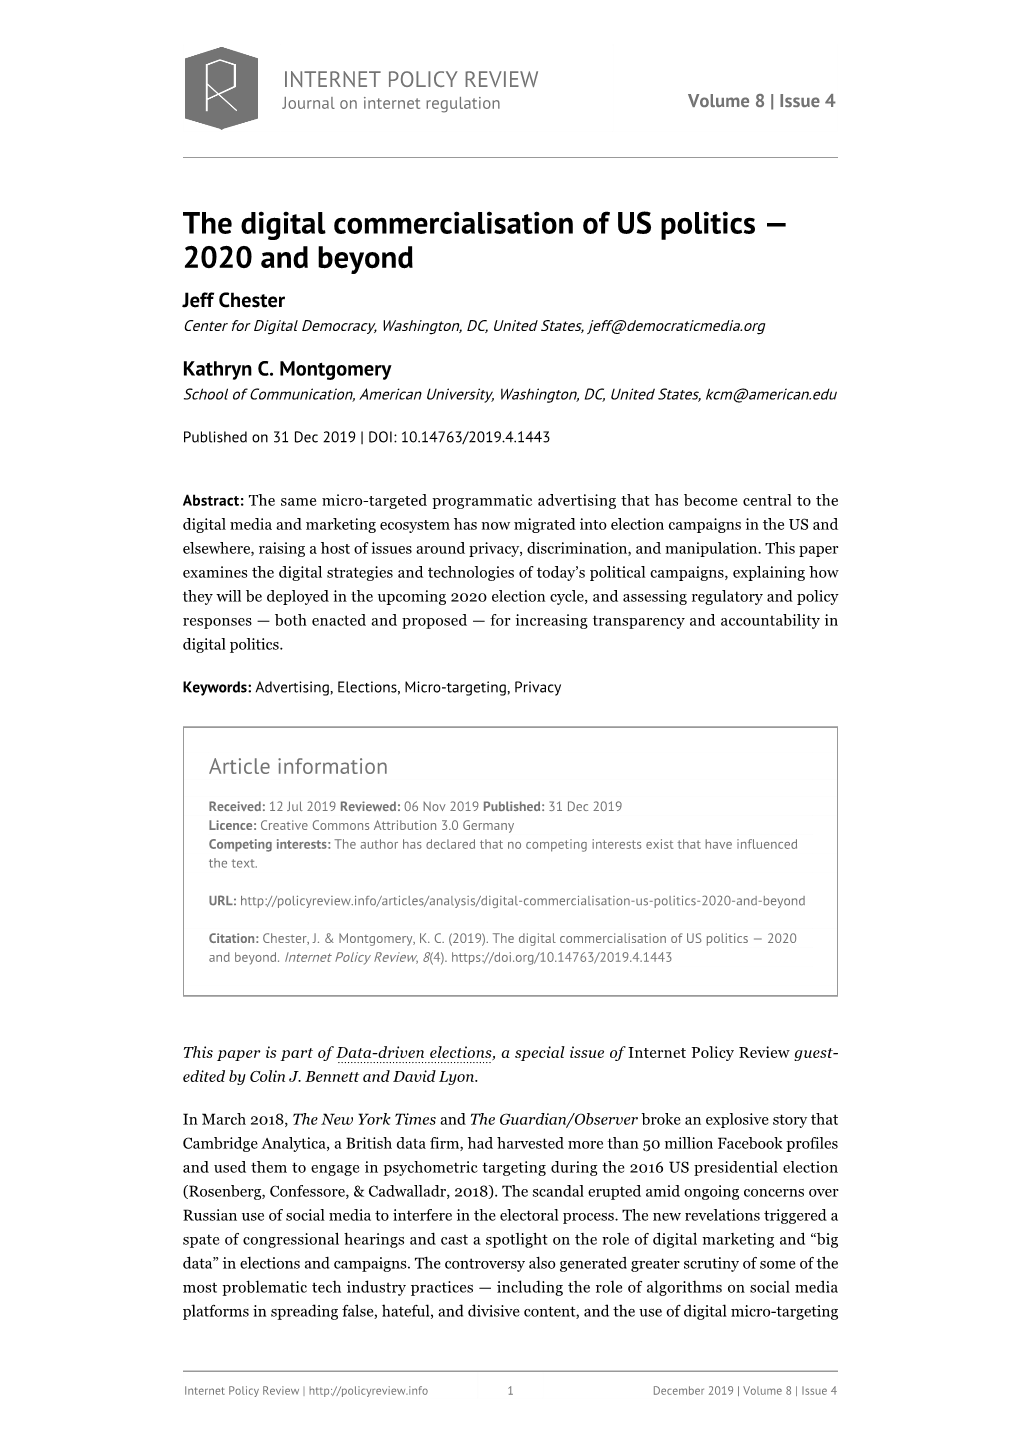 The Digital Commercialisation of US Politics — 2020 and Beyond Jeff Chester Center for Digital Democracy, Washington, DC, United States, Jeff@Democraticmedia.Org